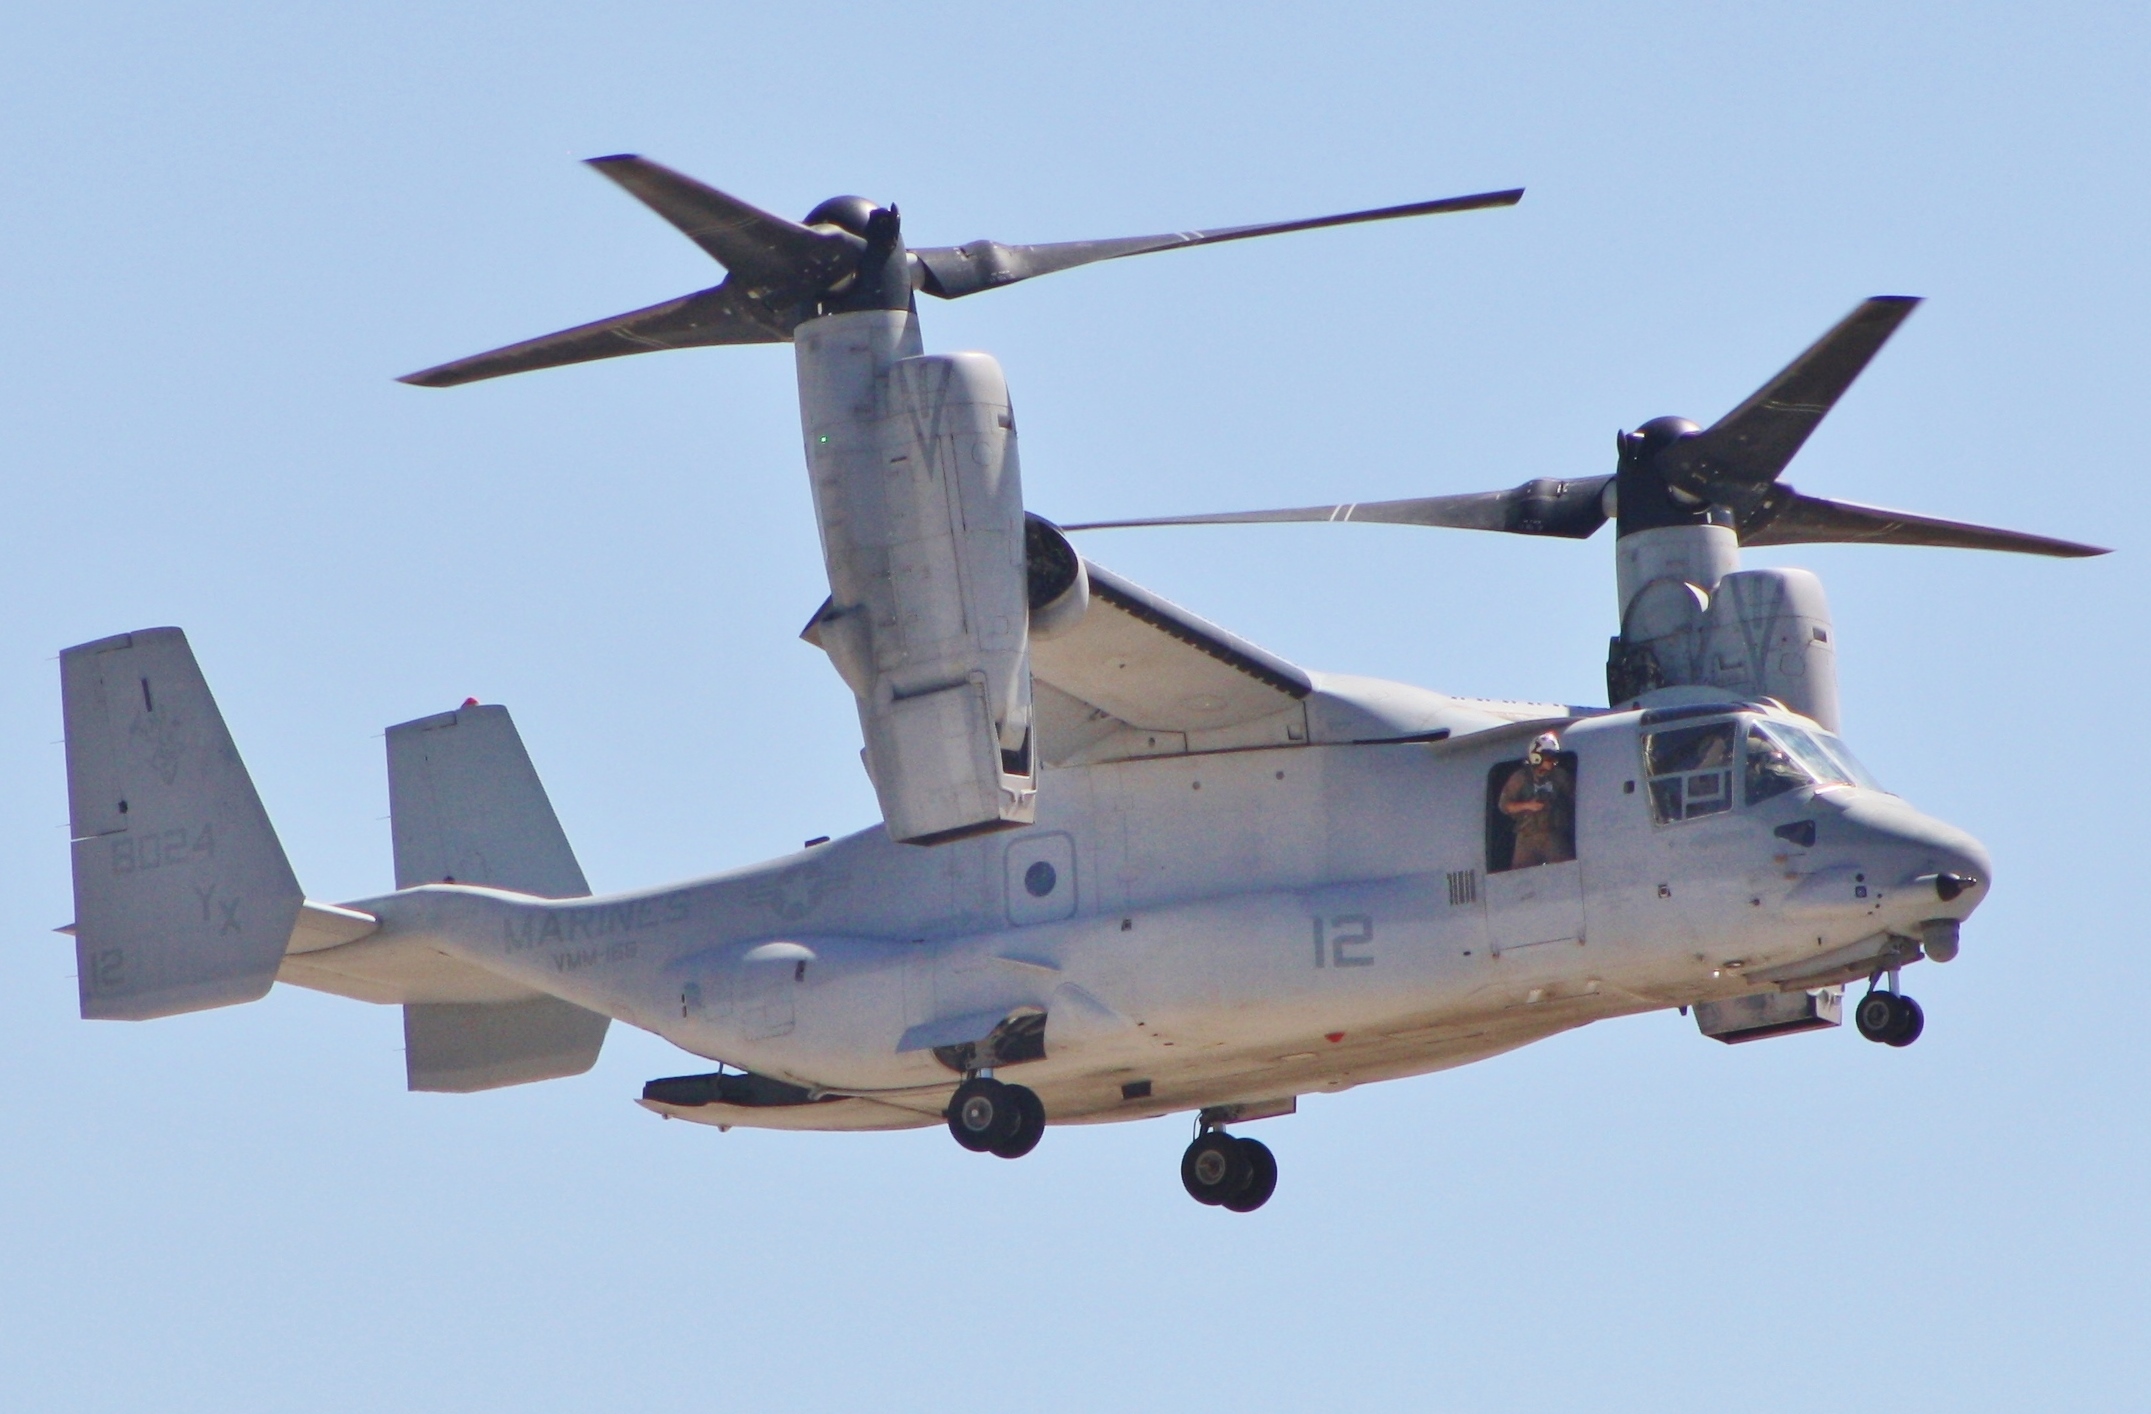 A large light gray helicopter with multiple visible rotor blades.